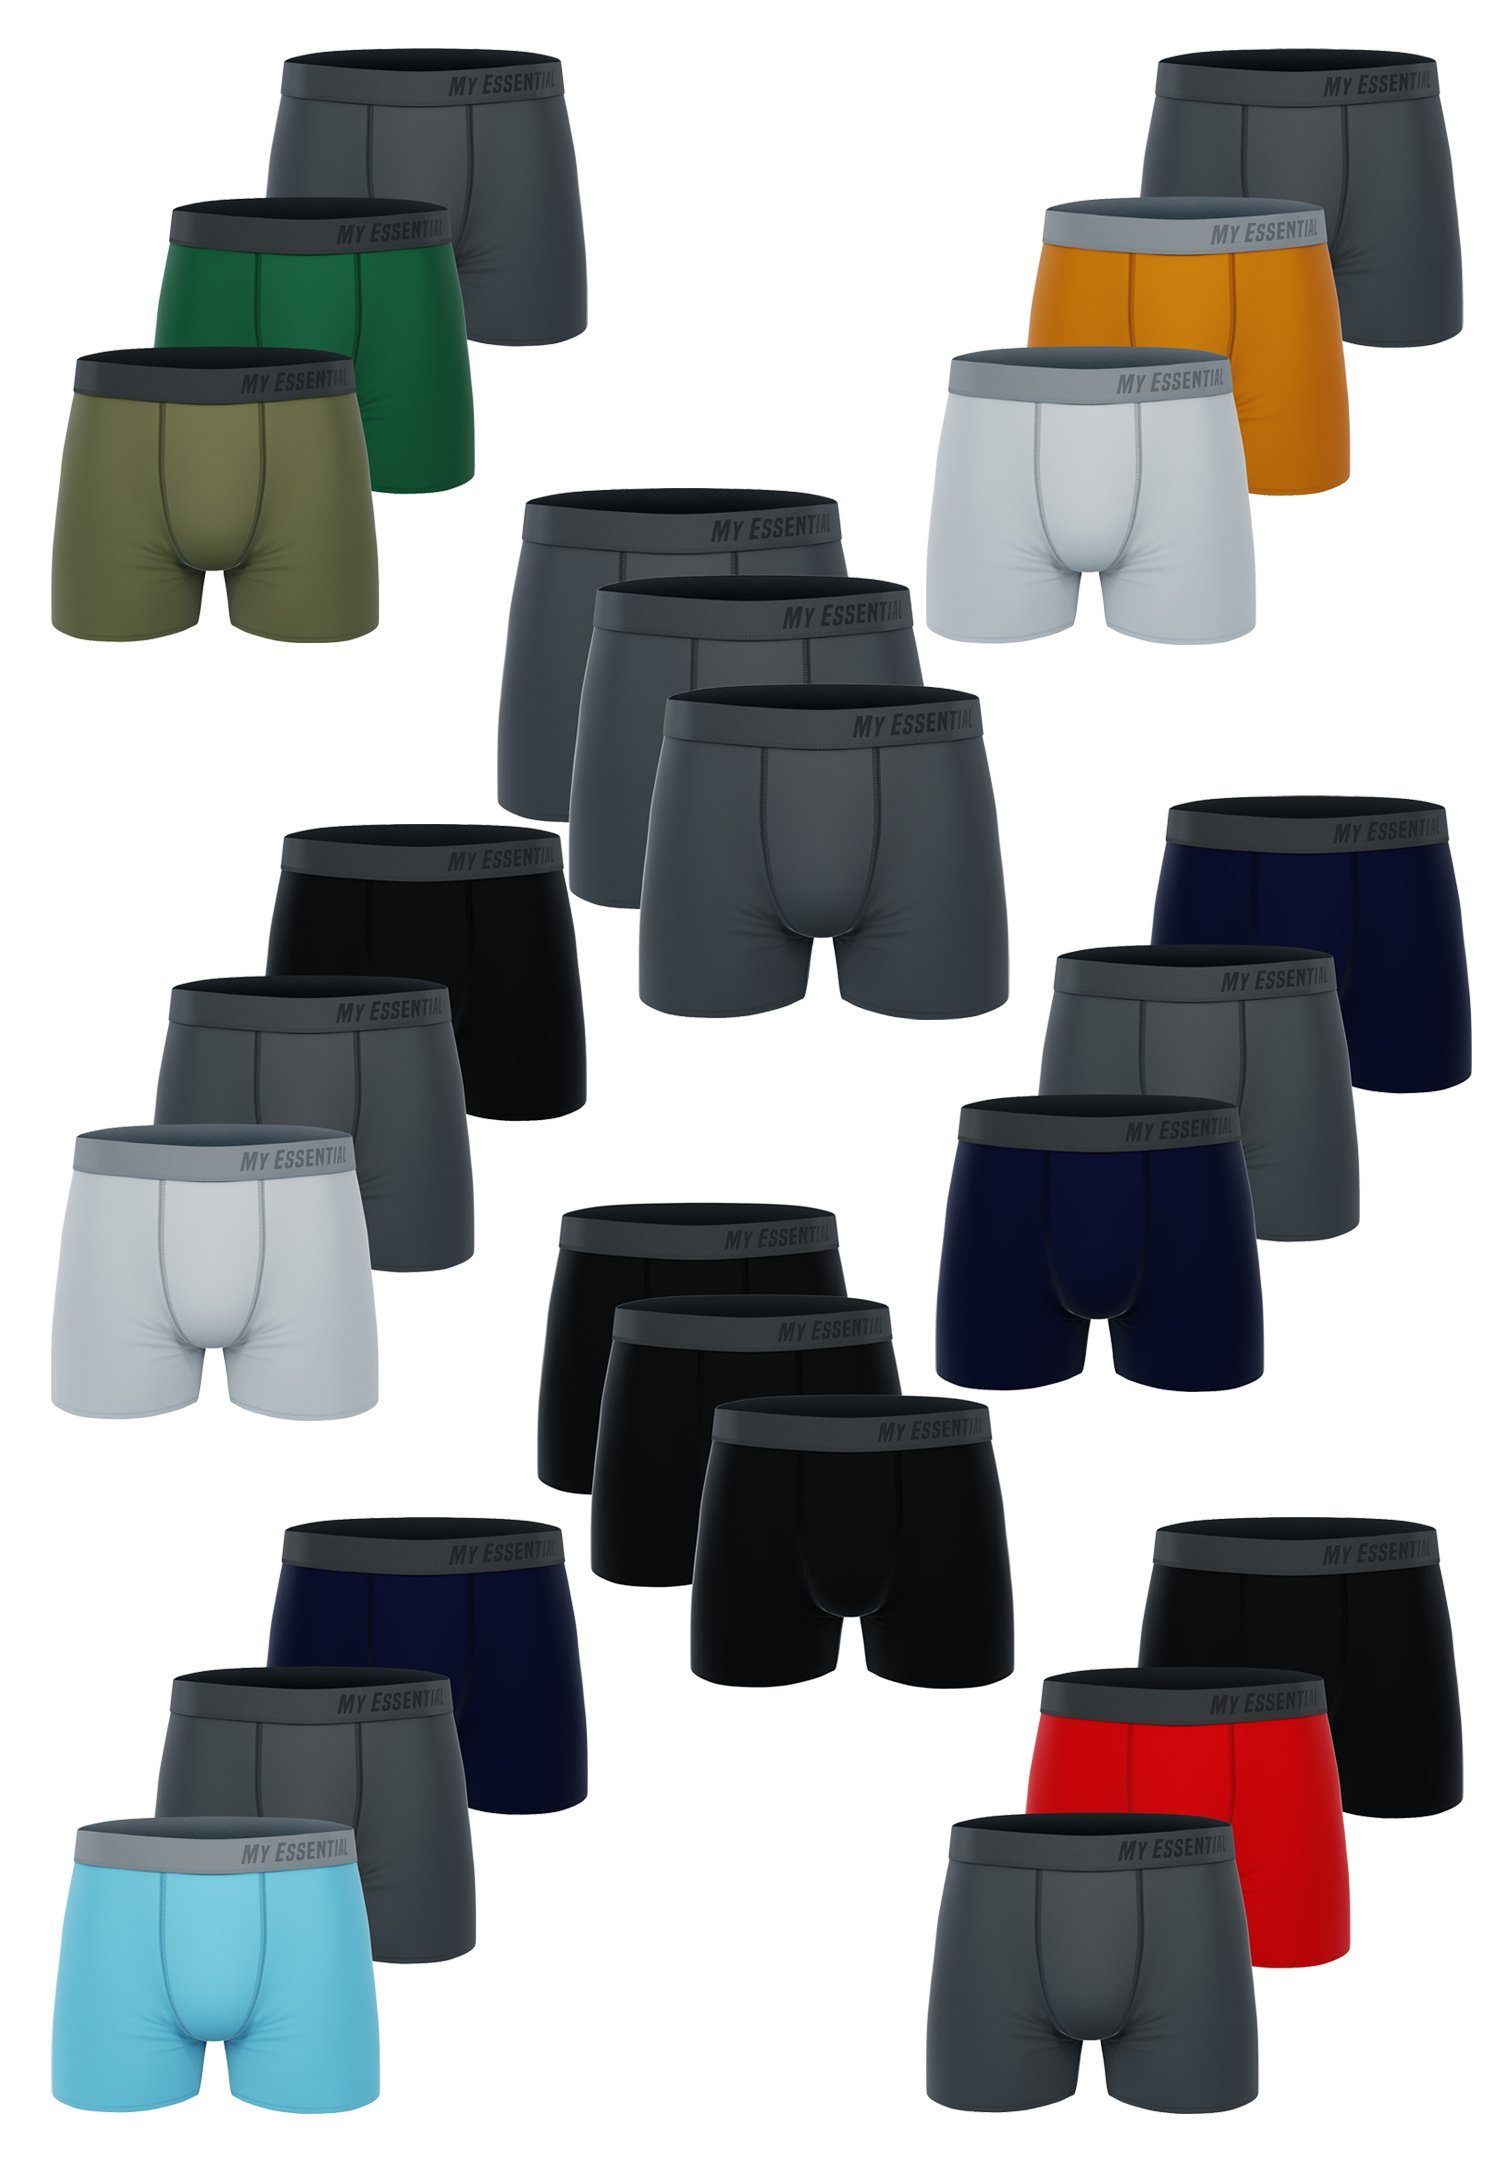 My 3er-Pack) Cotton My Essential Essential Black Boxershorts 3 Clothing Pack Bio (Spar-Pack, Boxers 3-St.,